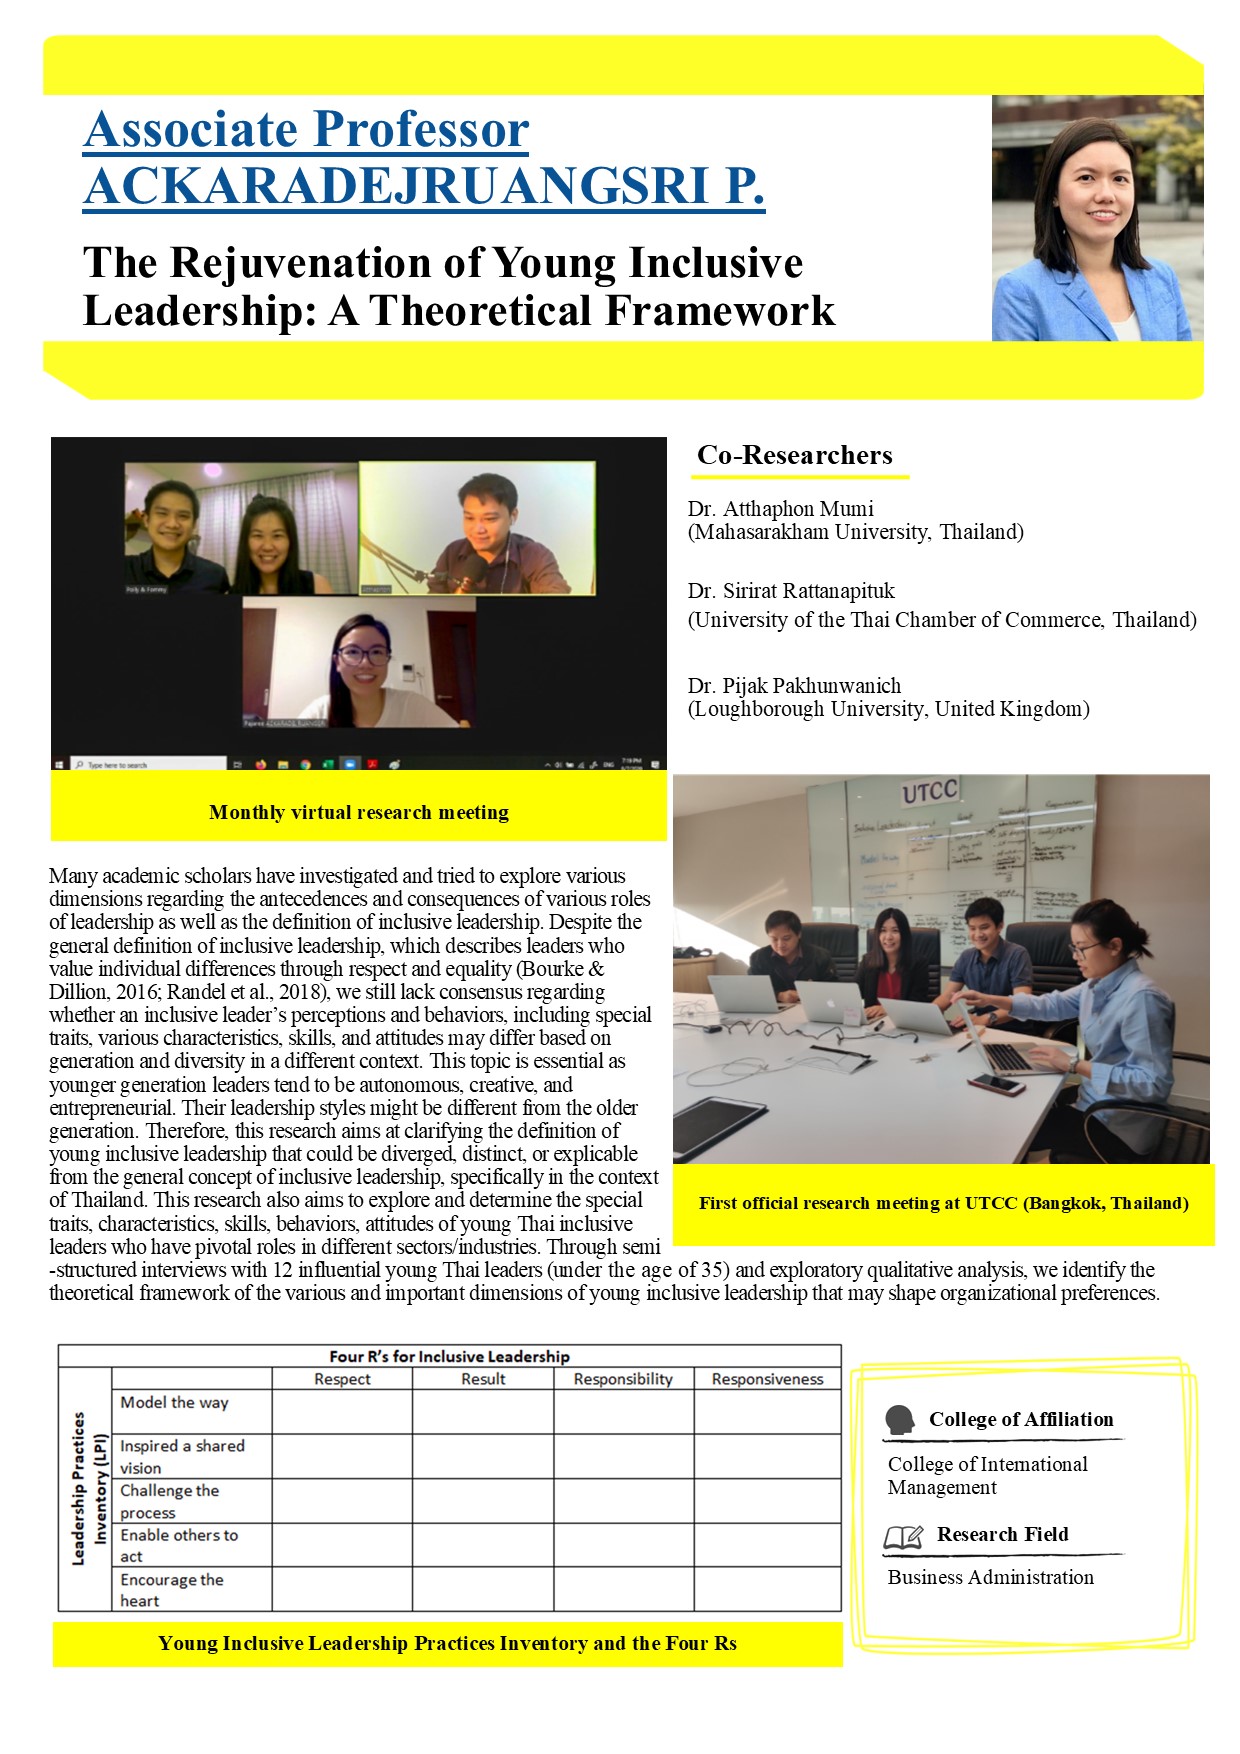 The Rejuvenation of Young Inclusive Leadership: A Theoretical Framework